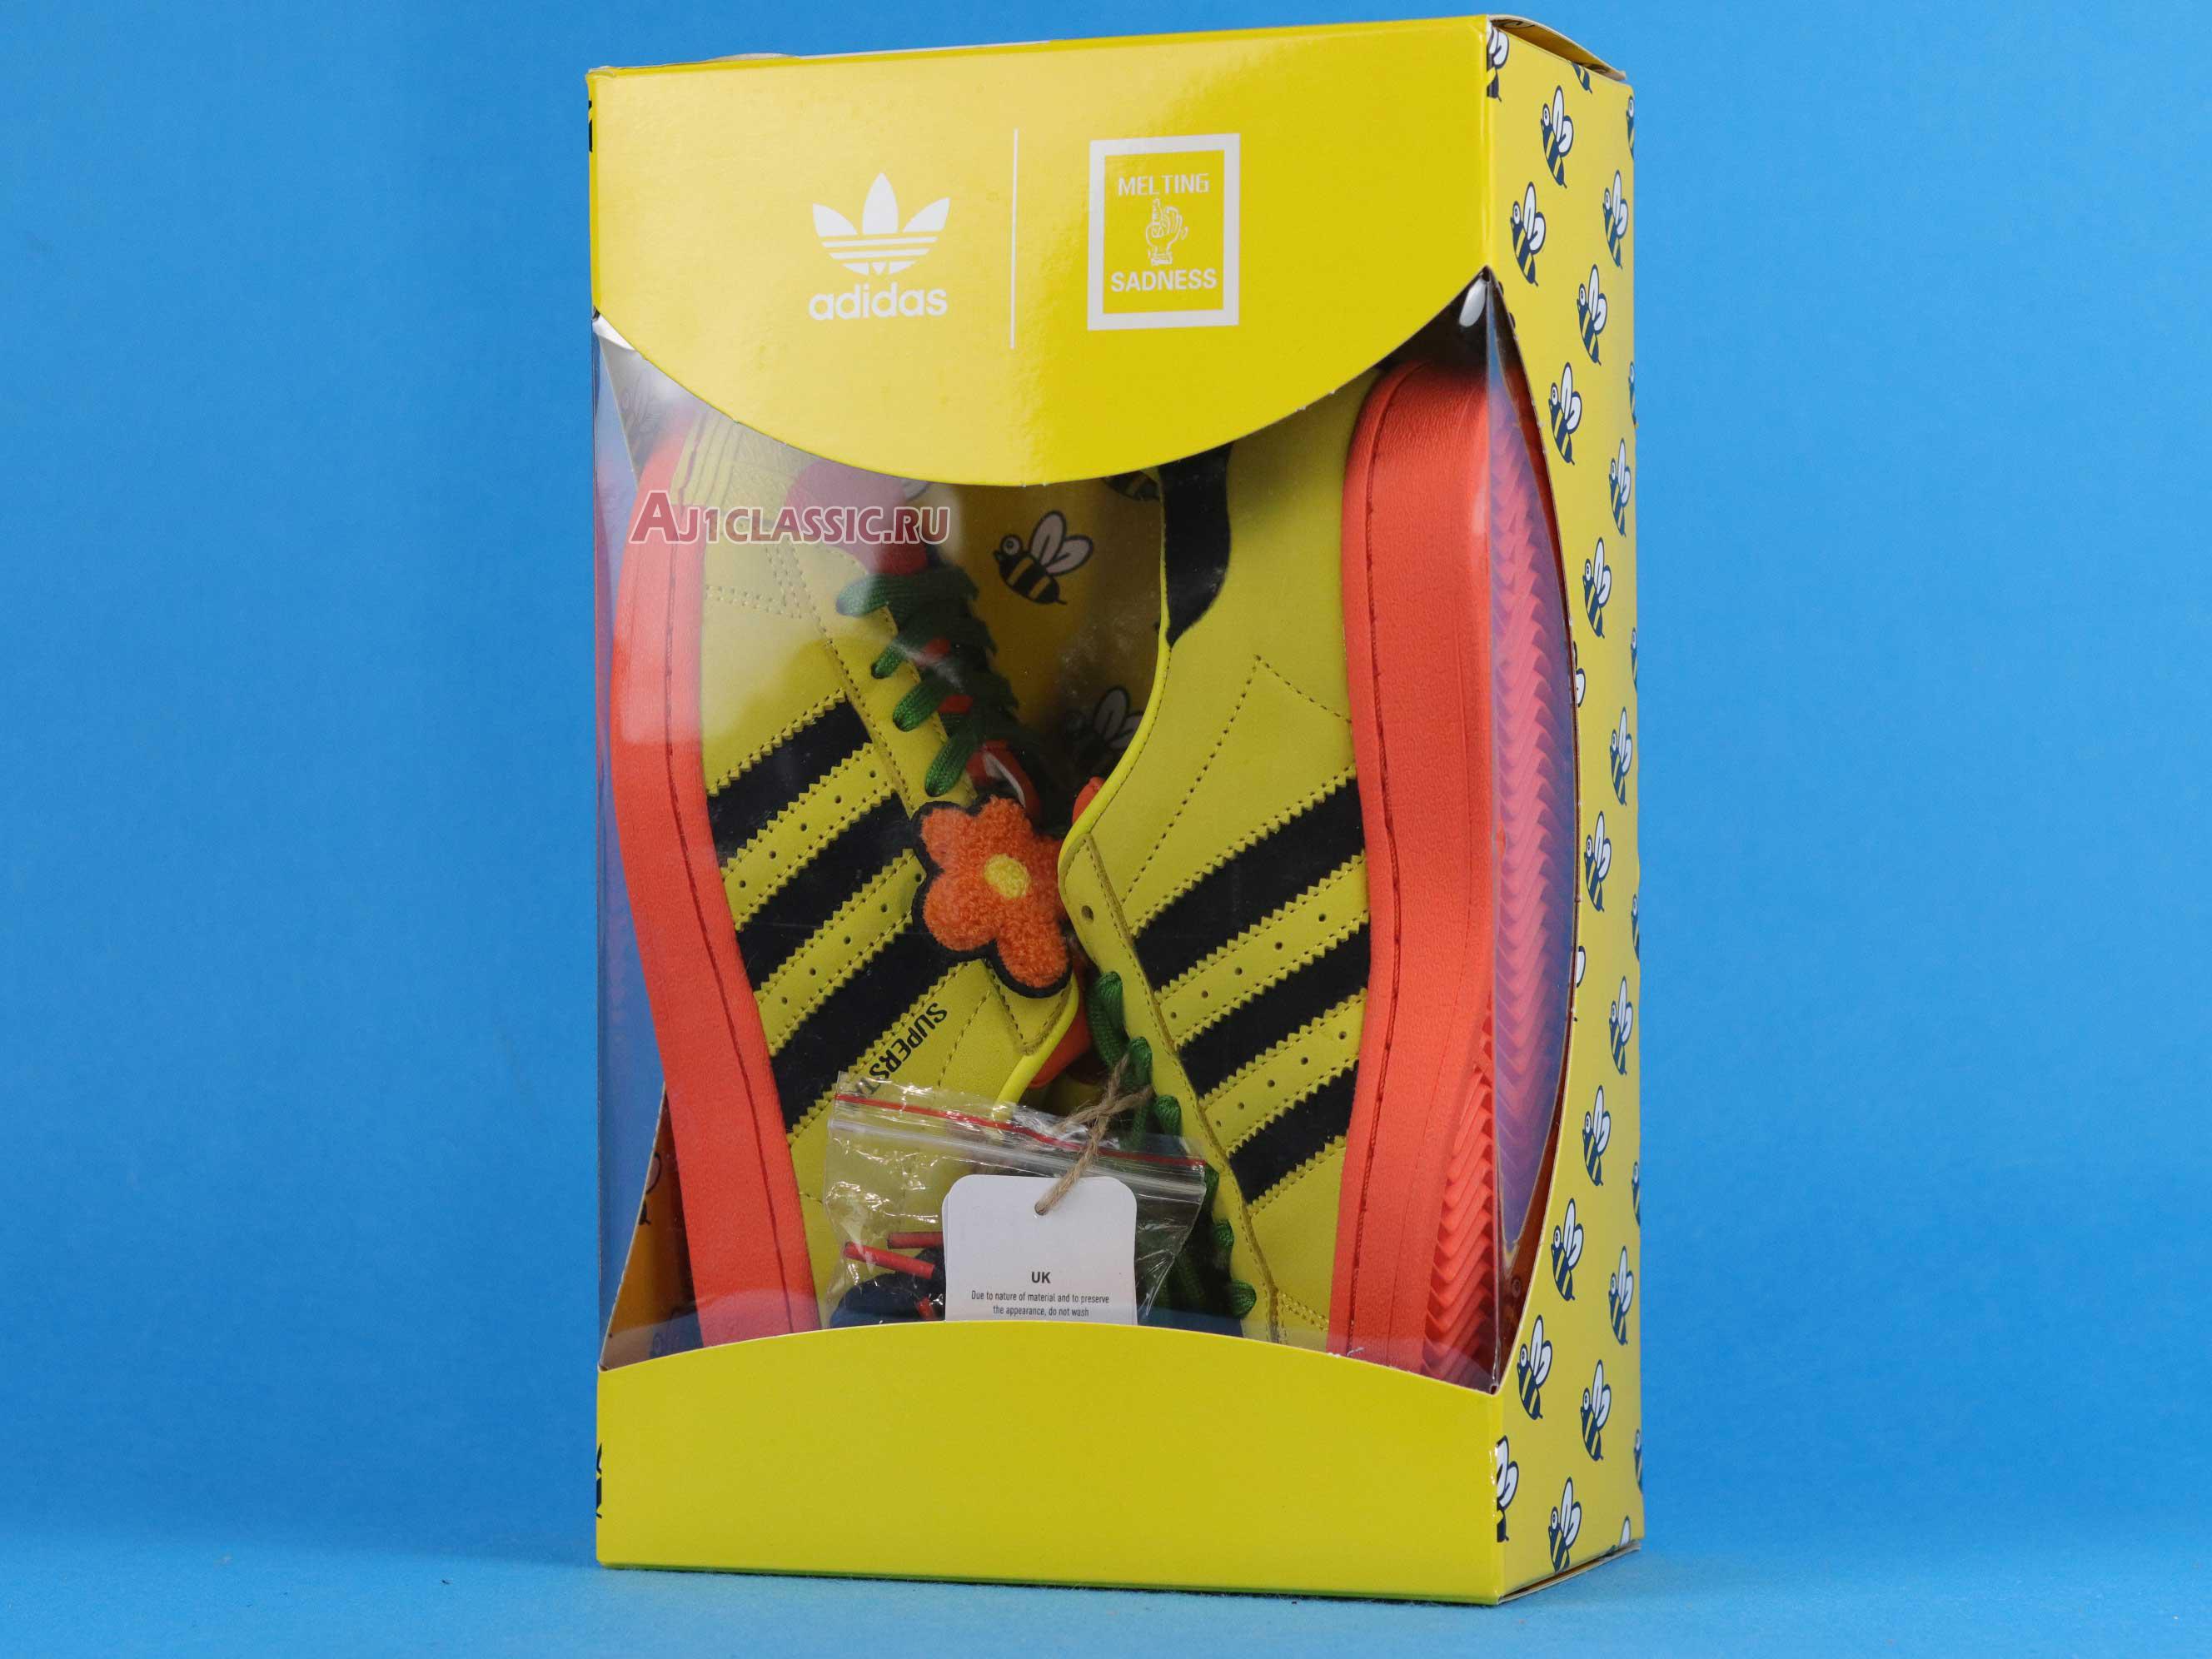 Melting Sadness x Adidas Superstar "Bee with You Pack - Yellow" FZ5254